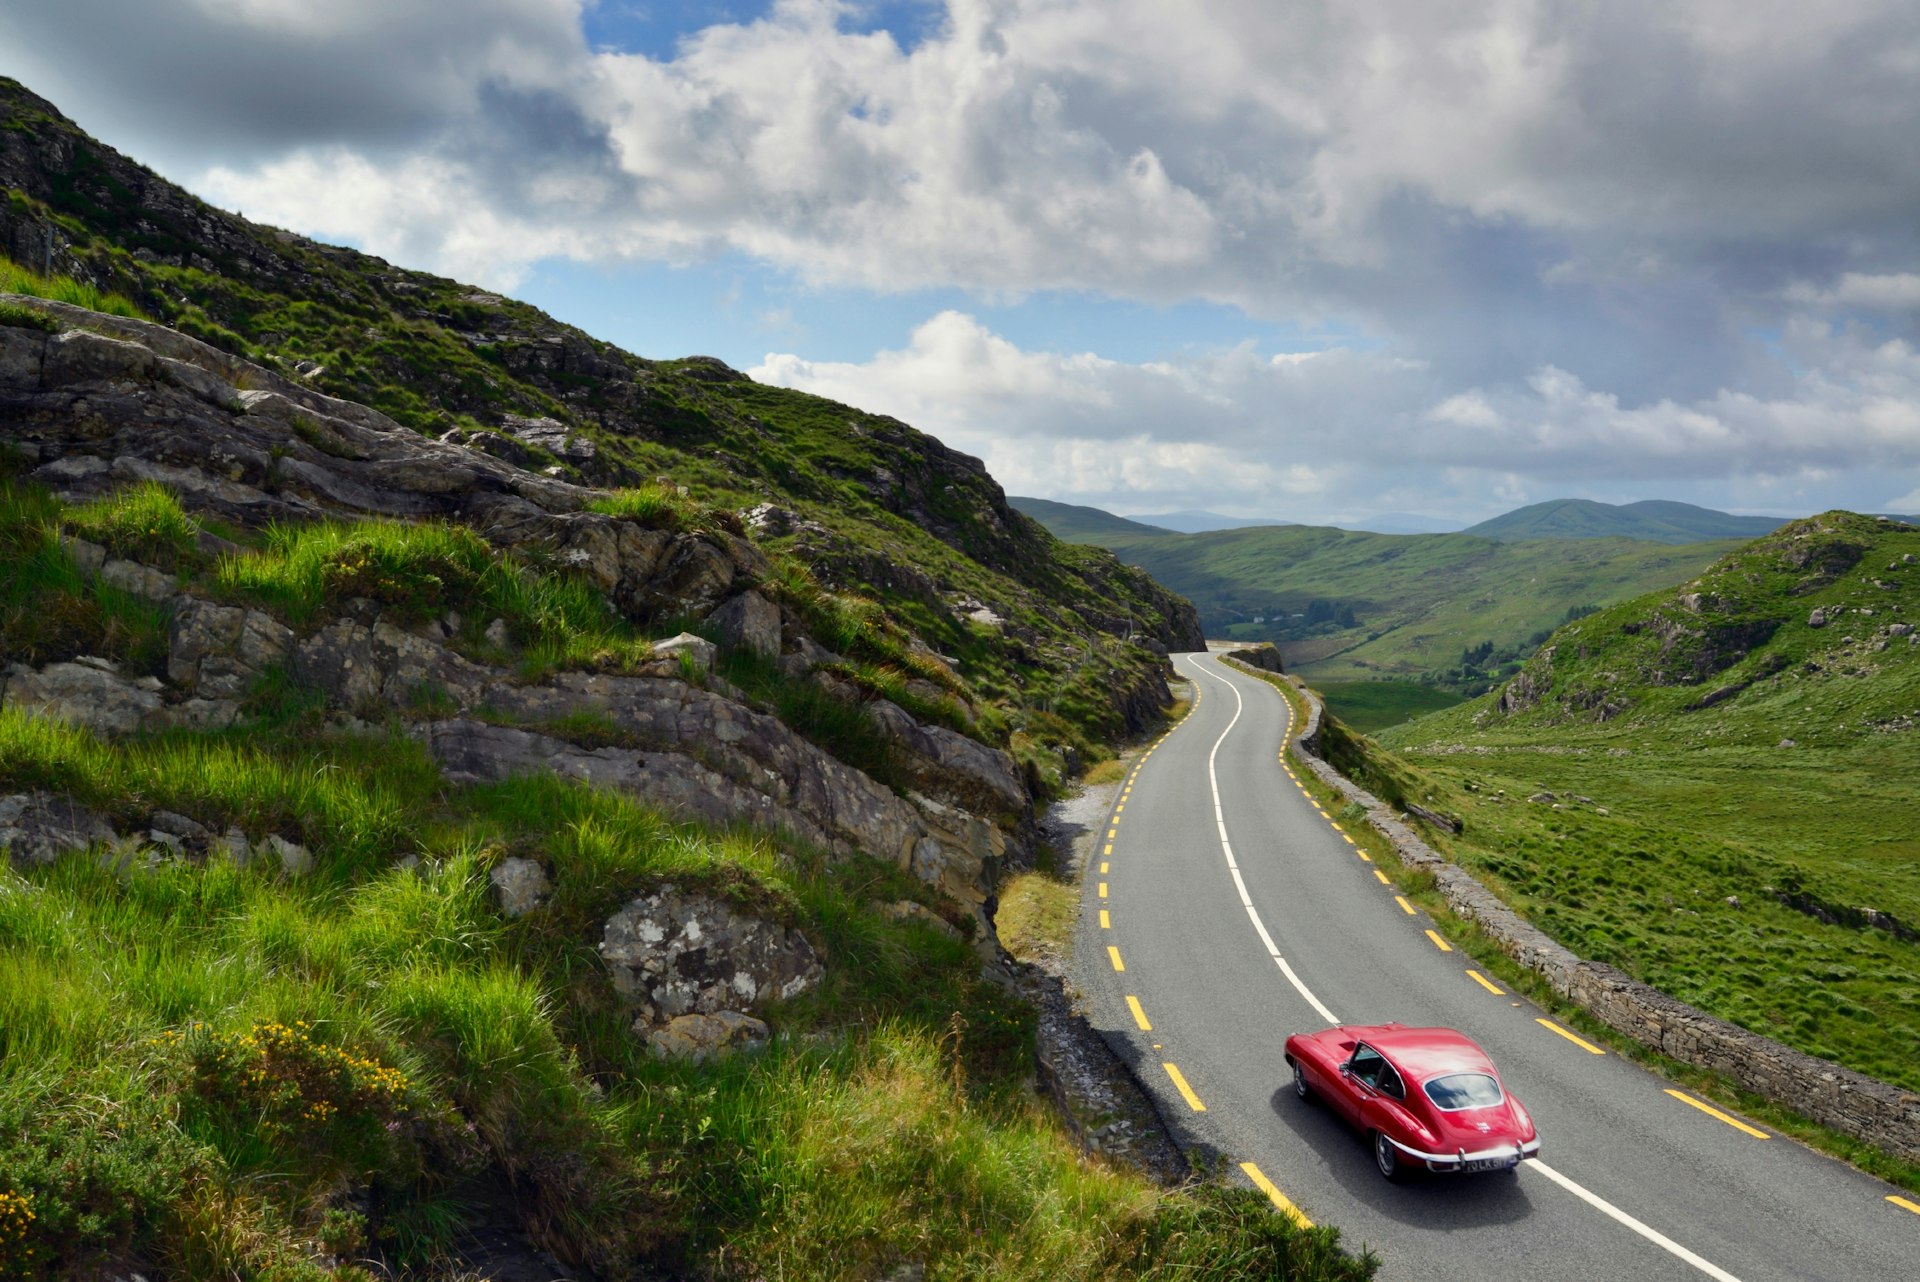 An old-fashioned red car drives along a road set on rolling green hills under a cloudy sky